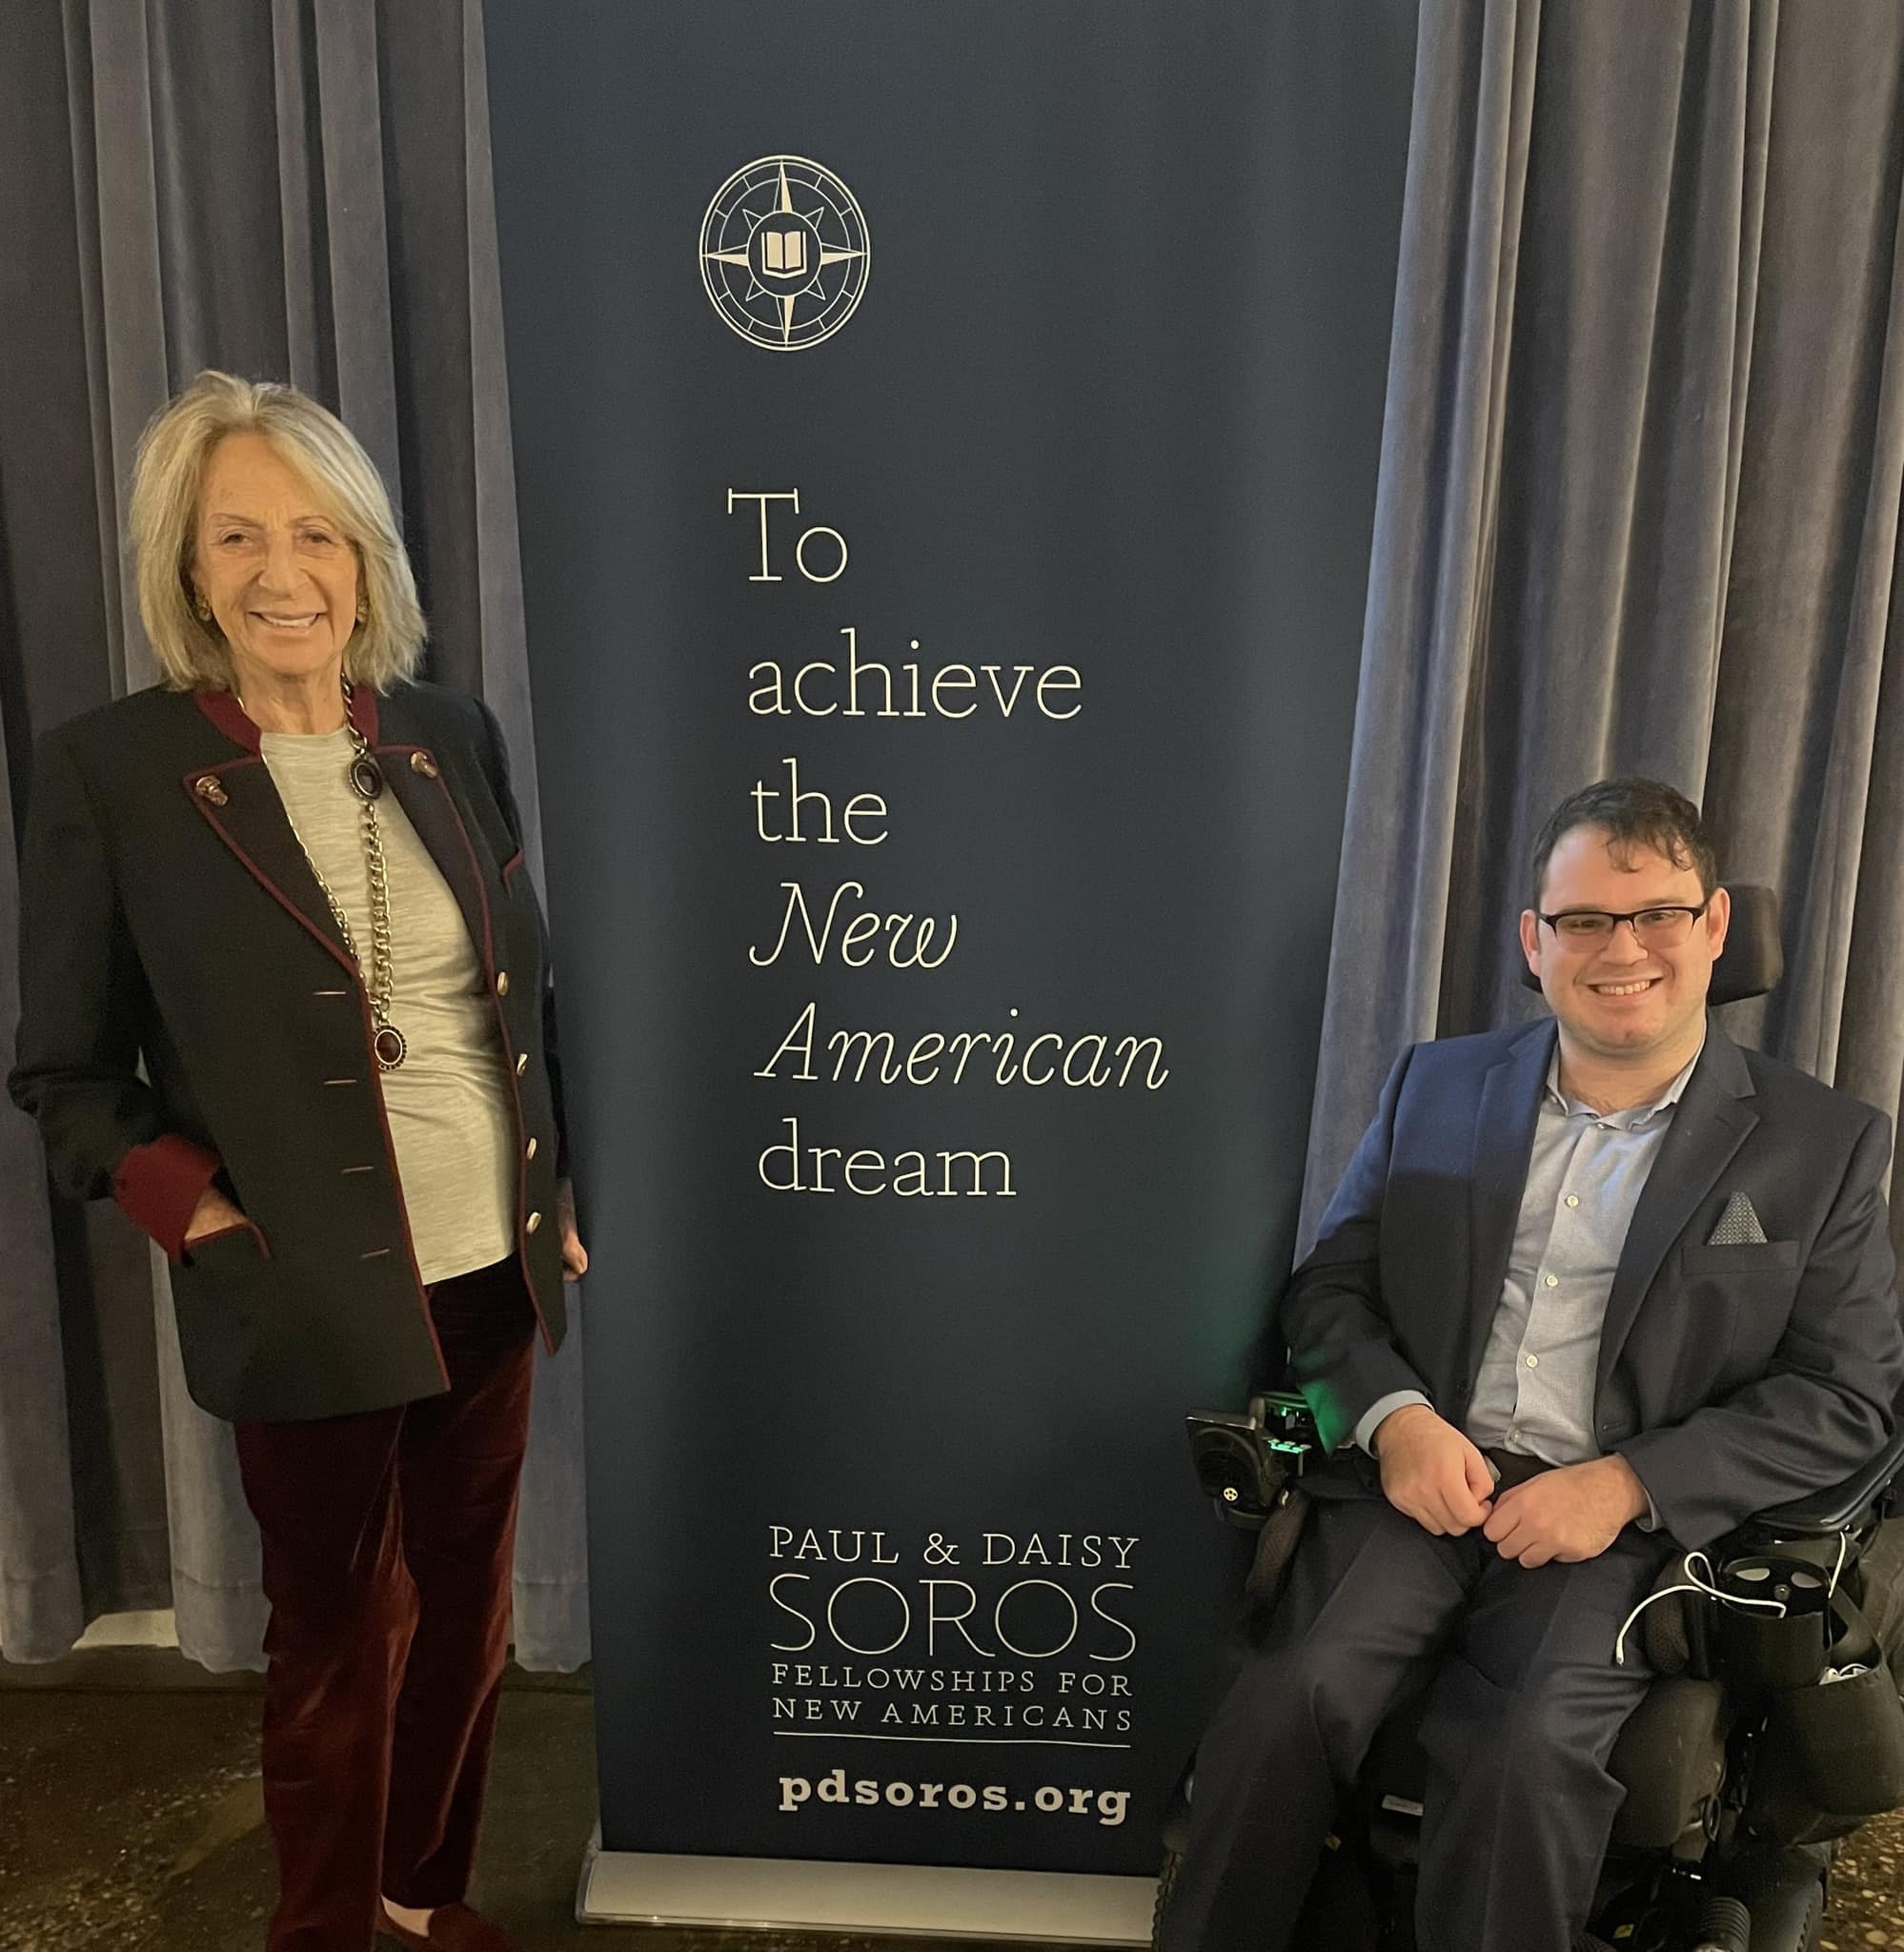 Edward Friedman in his power wheelchair and Daisy Soros standing in front of a banner that reads "To achieve the New American dream."